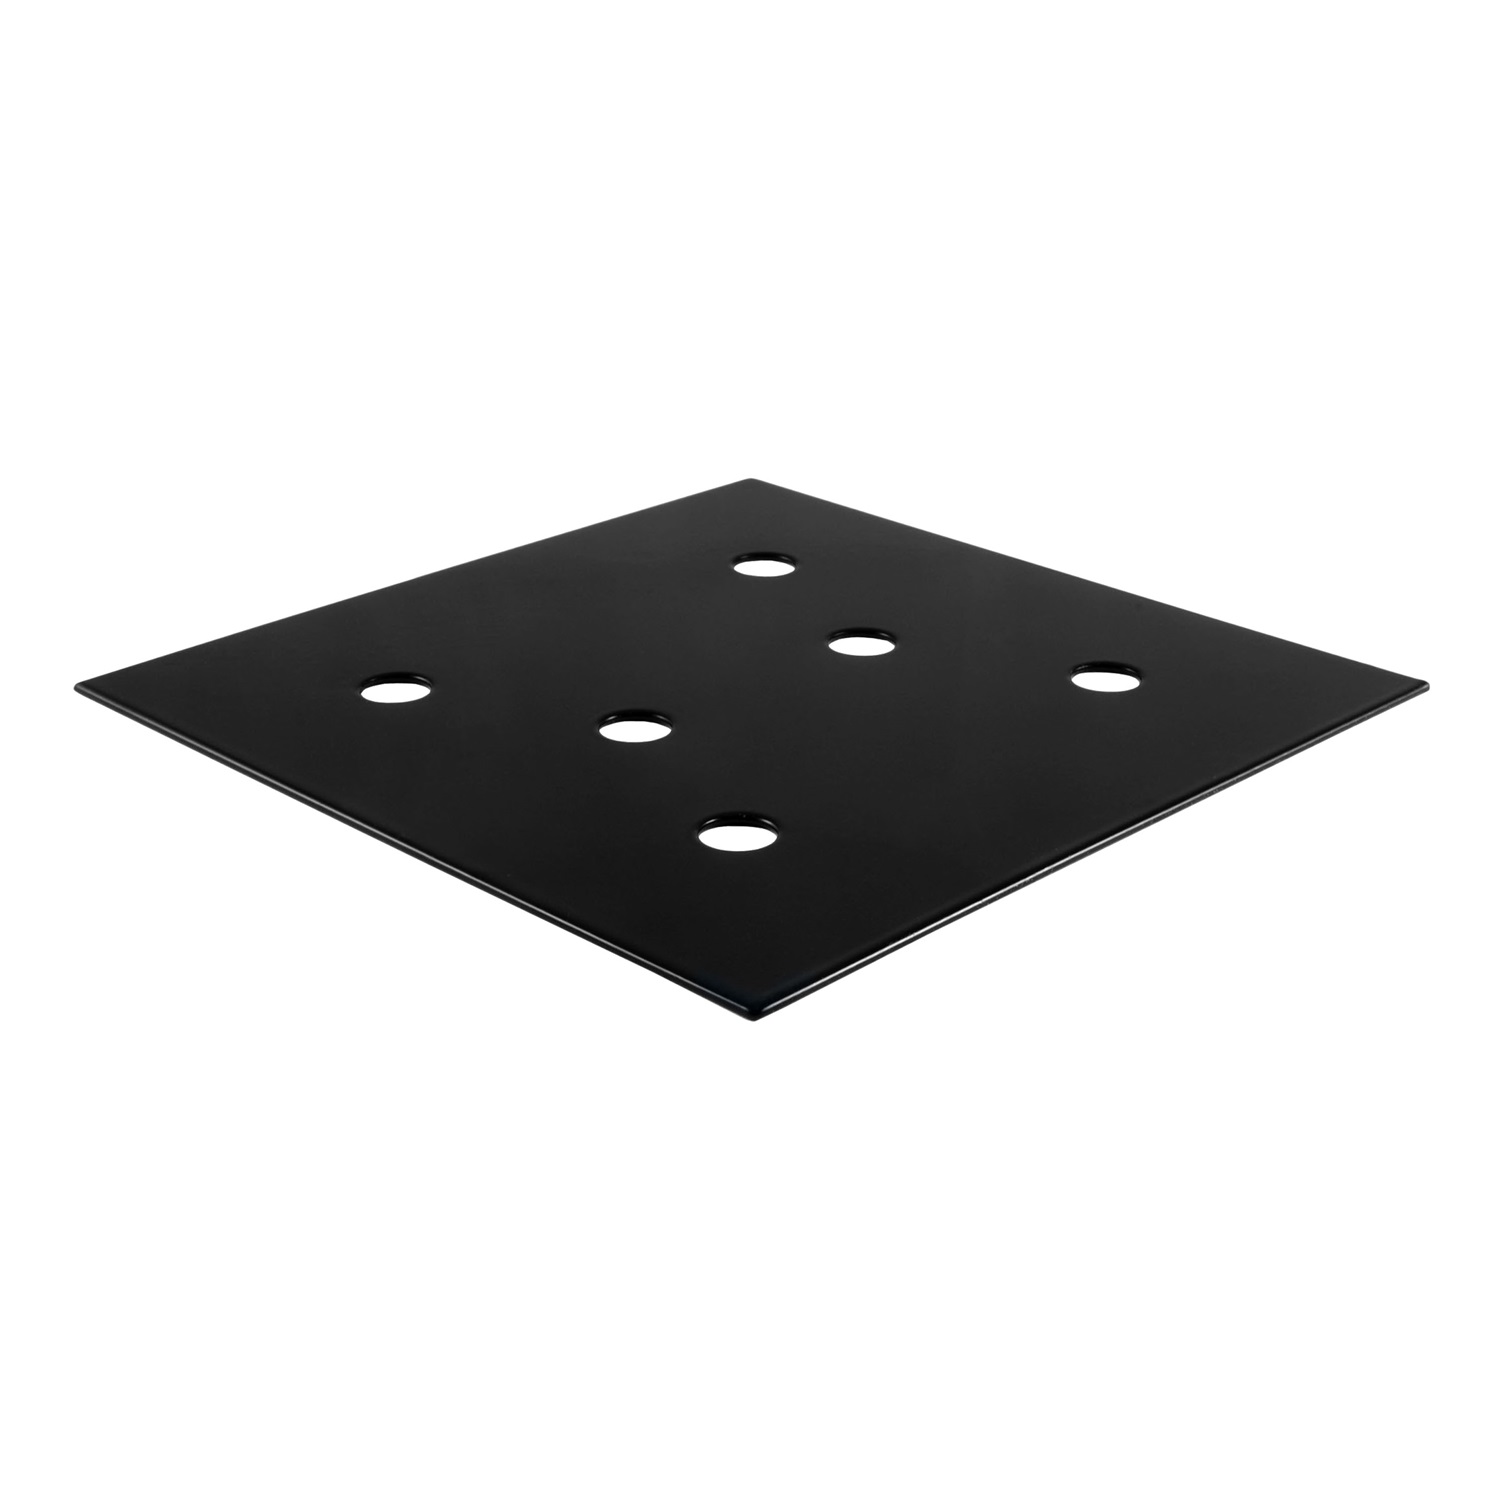 CURT Manufacturing CURT Manufacturing 83607 Steel Backing Plate  Fits